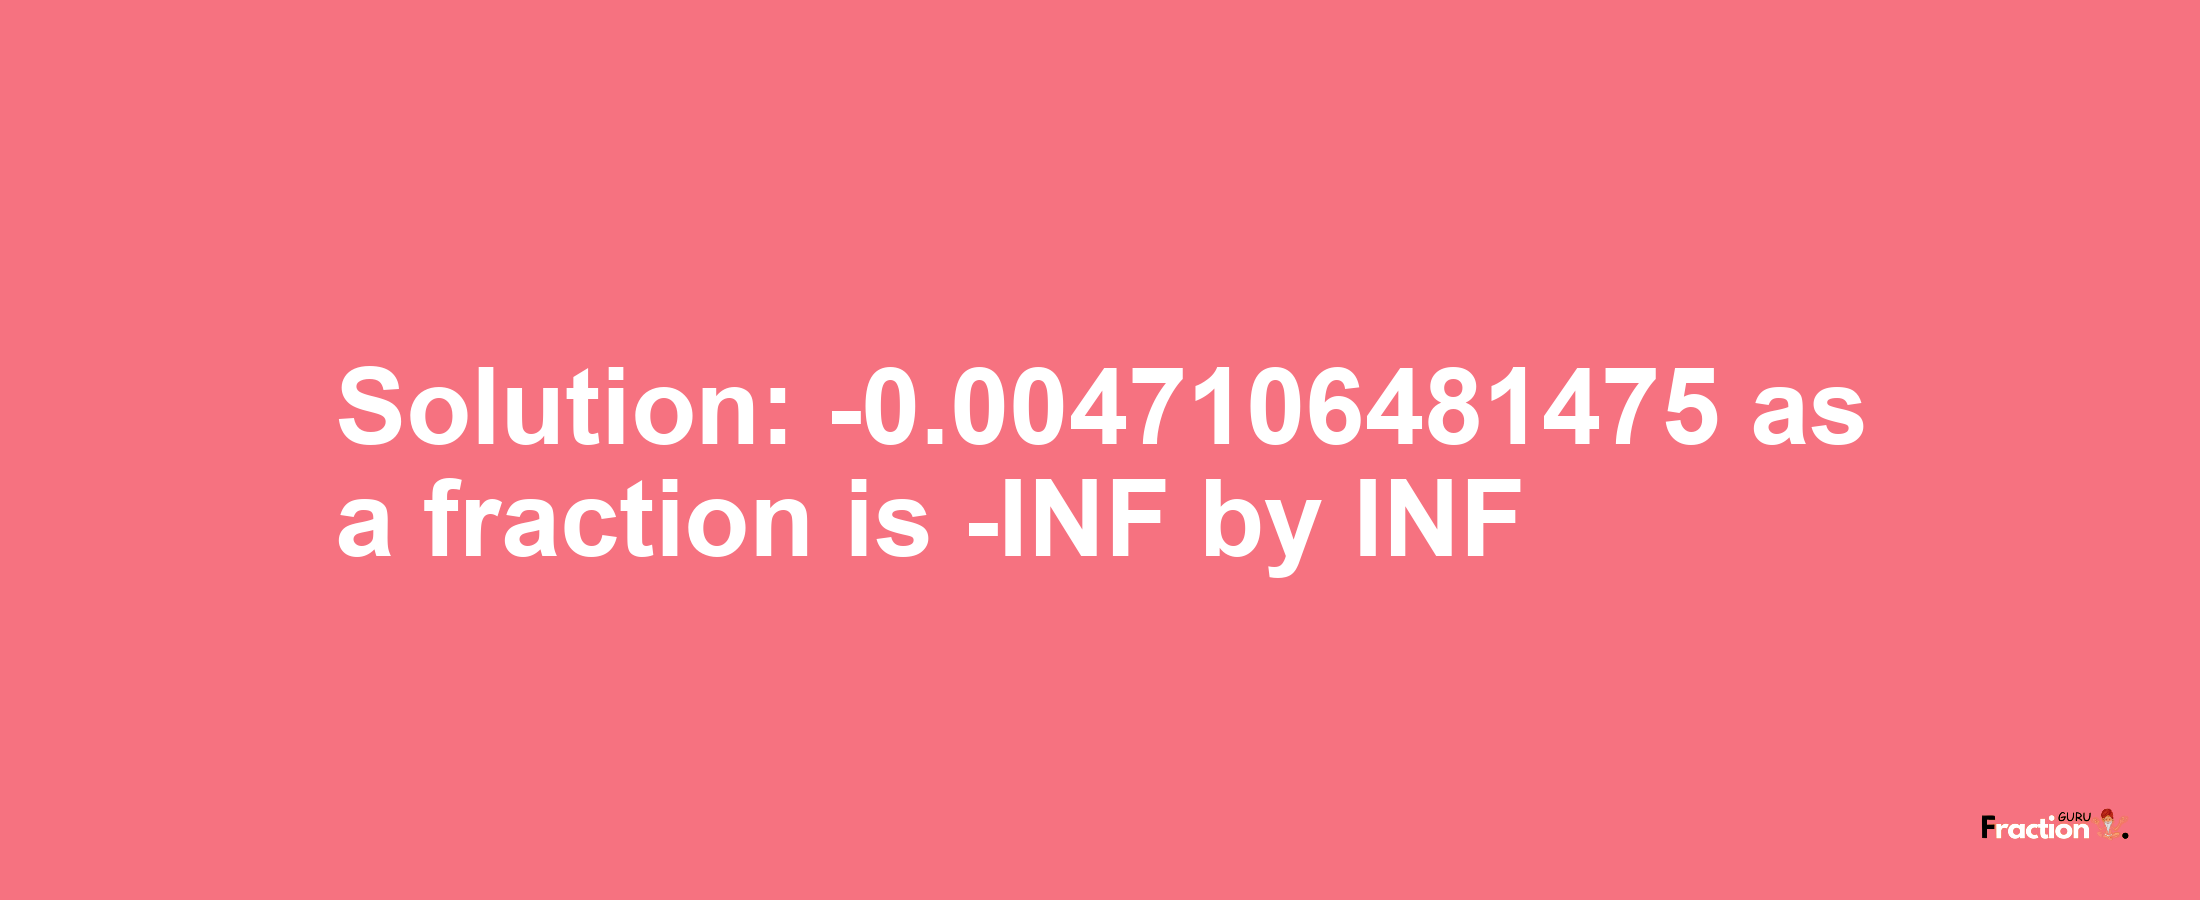 Solution:-0.0047106481475 as a fraction is -INF/INF